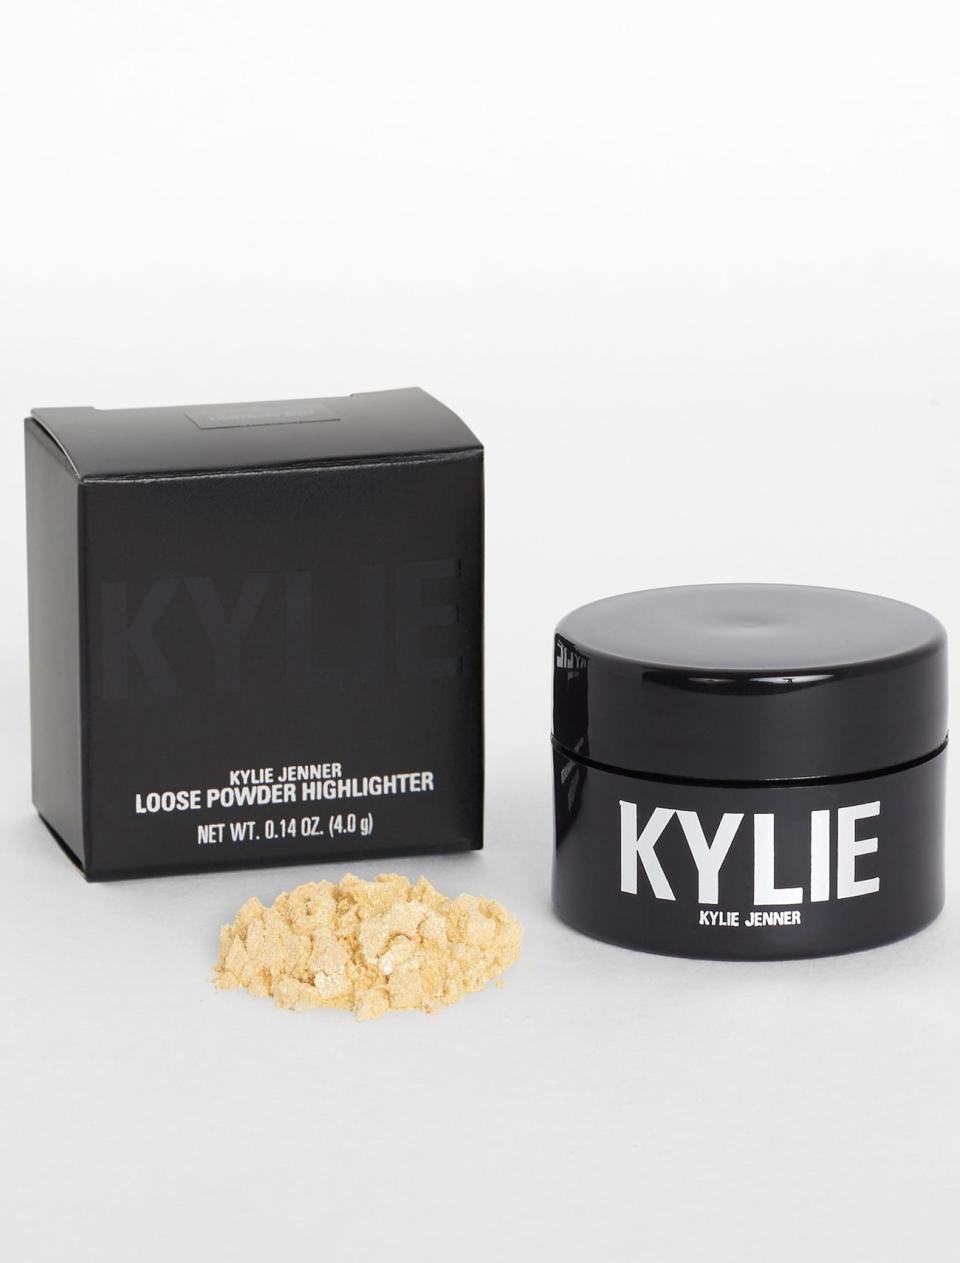 Shop Now: Kylie Cosmetics Ultra Glow in Lighting Bolt, $14, available at Kylie Cosmetics.